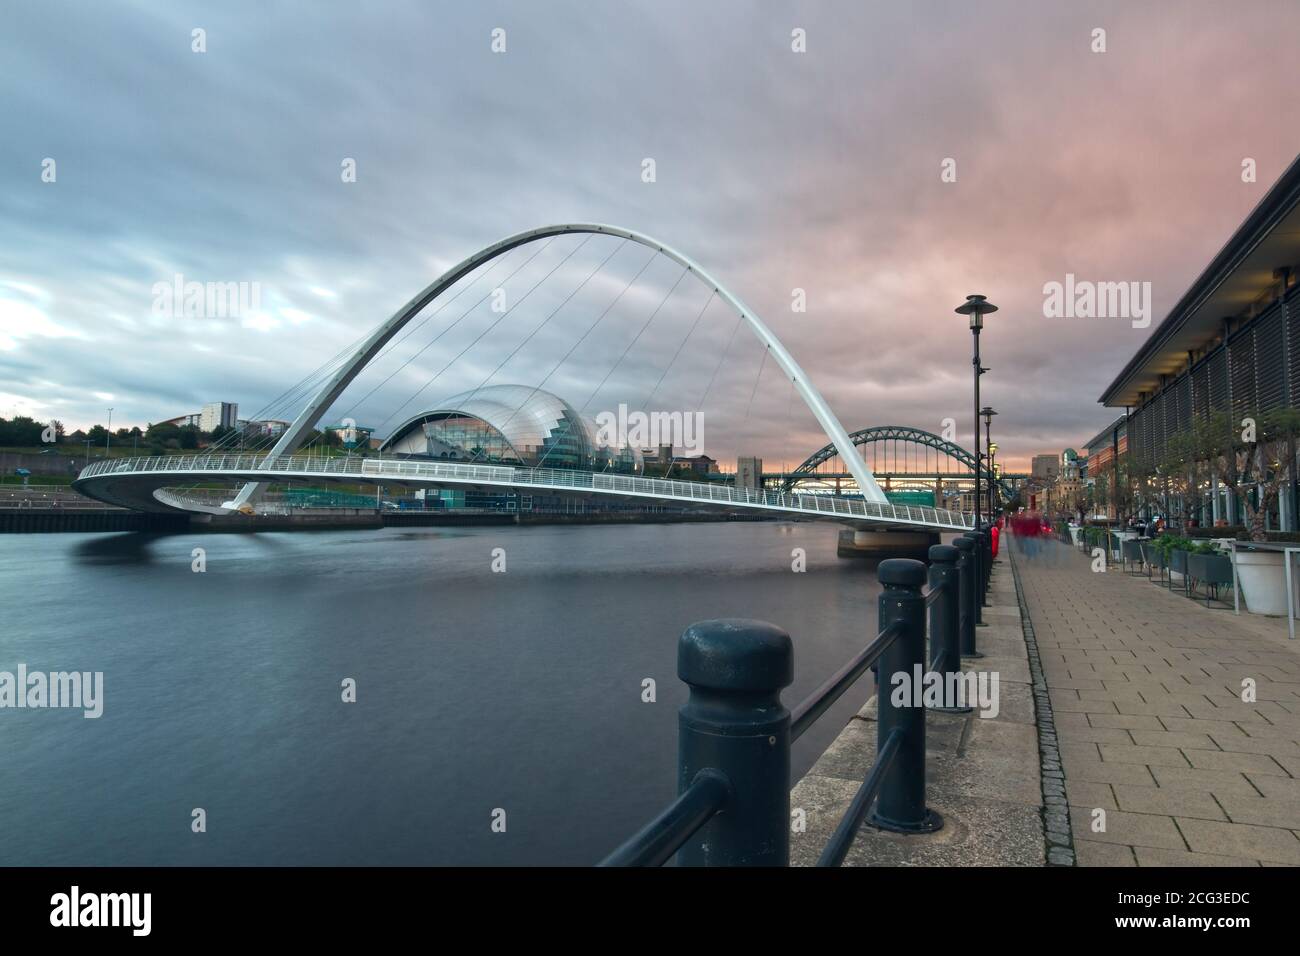 The Gateshead Millennium Bridge spanning the River Tyne captured at dusk from Newcastle quayside looking up the River Tyne. Stock Photo